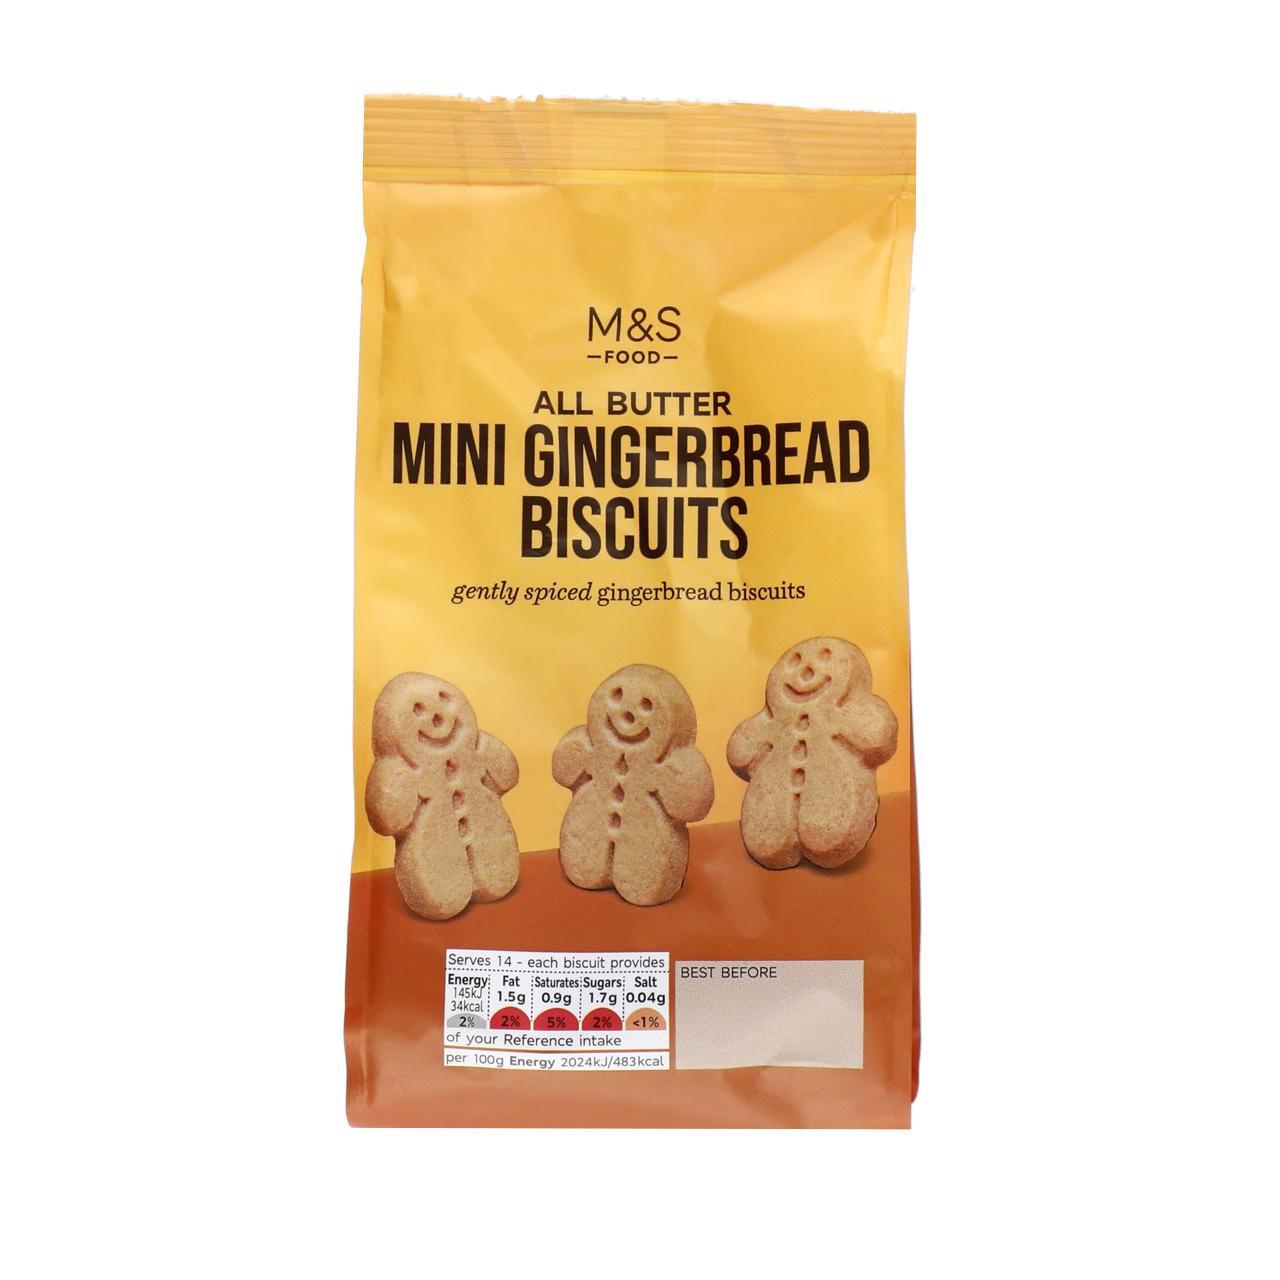 M&S All Butter Mini Gingerbread Biscuits